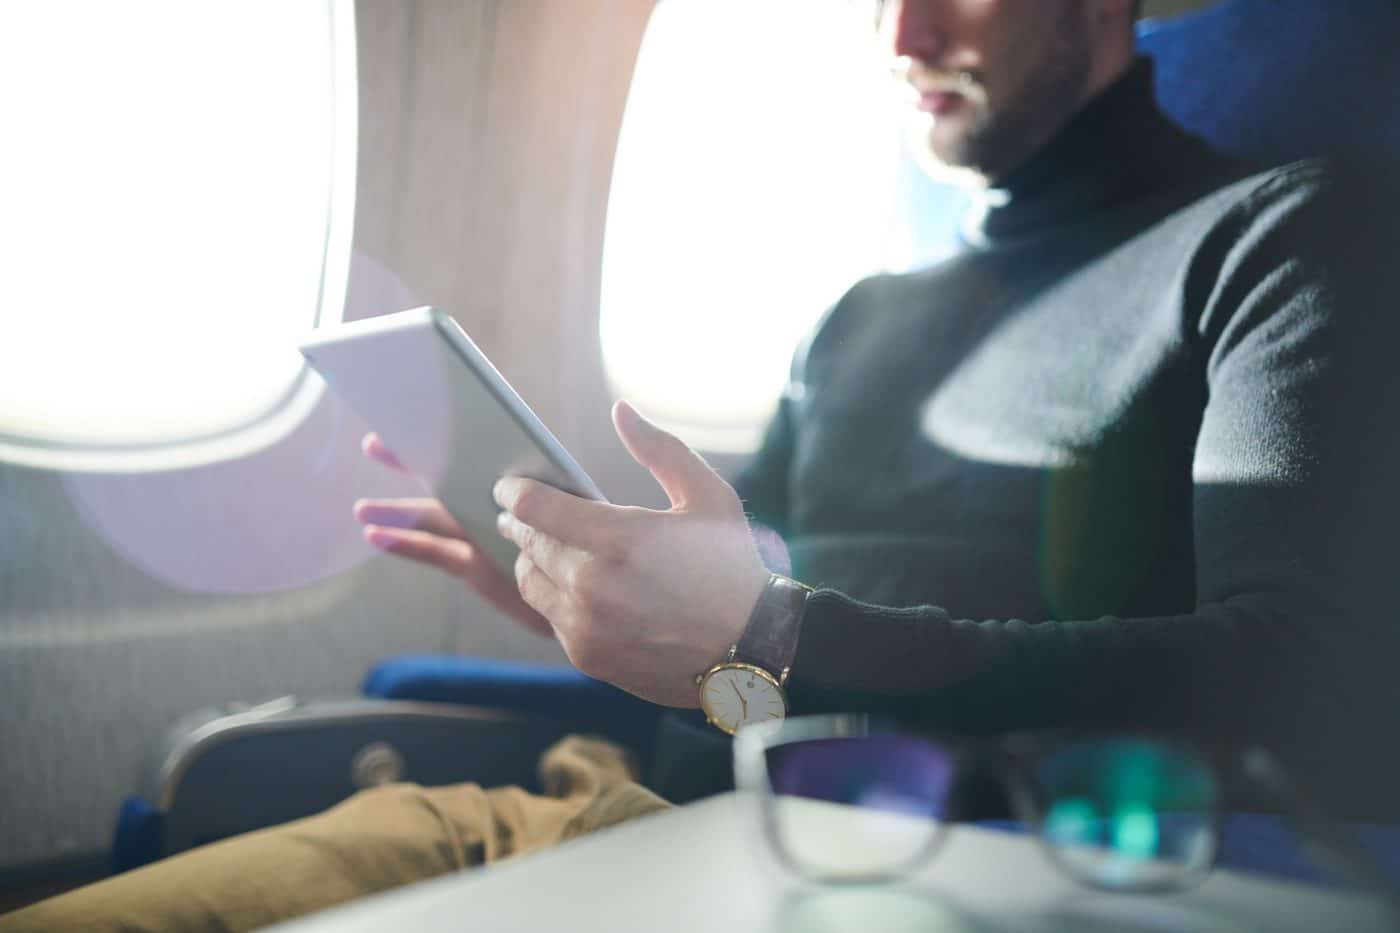 Man Using Tablet In Airplane